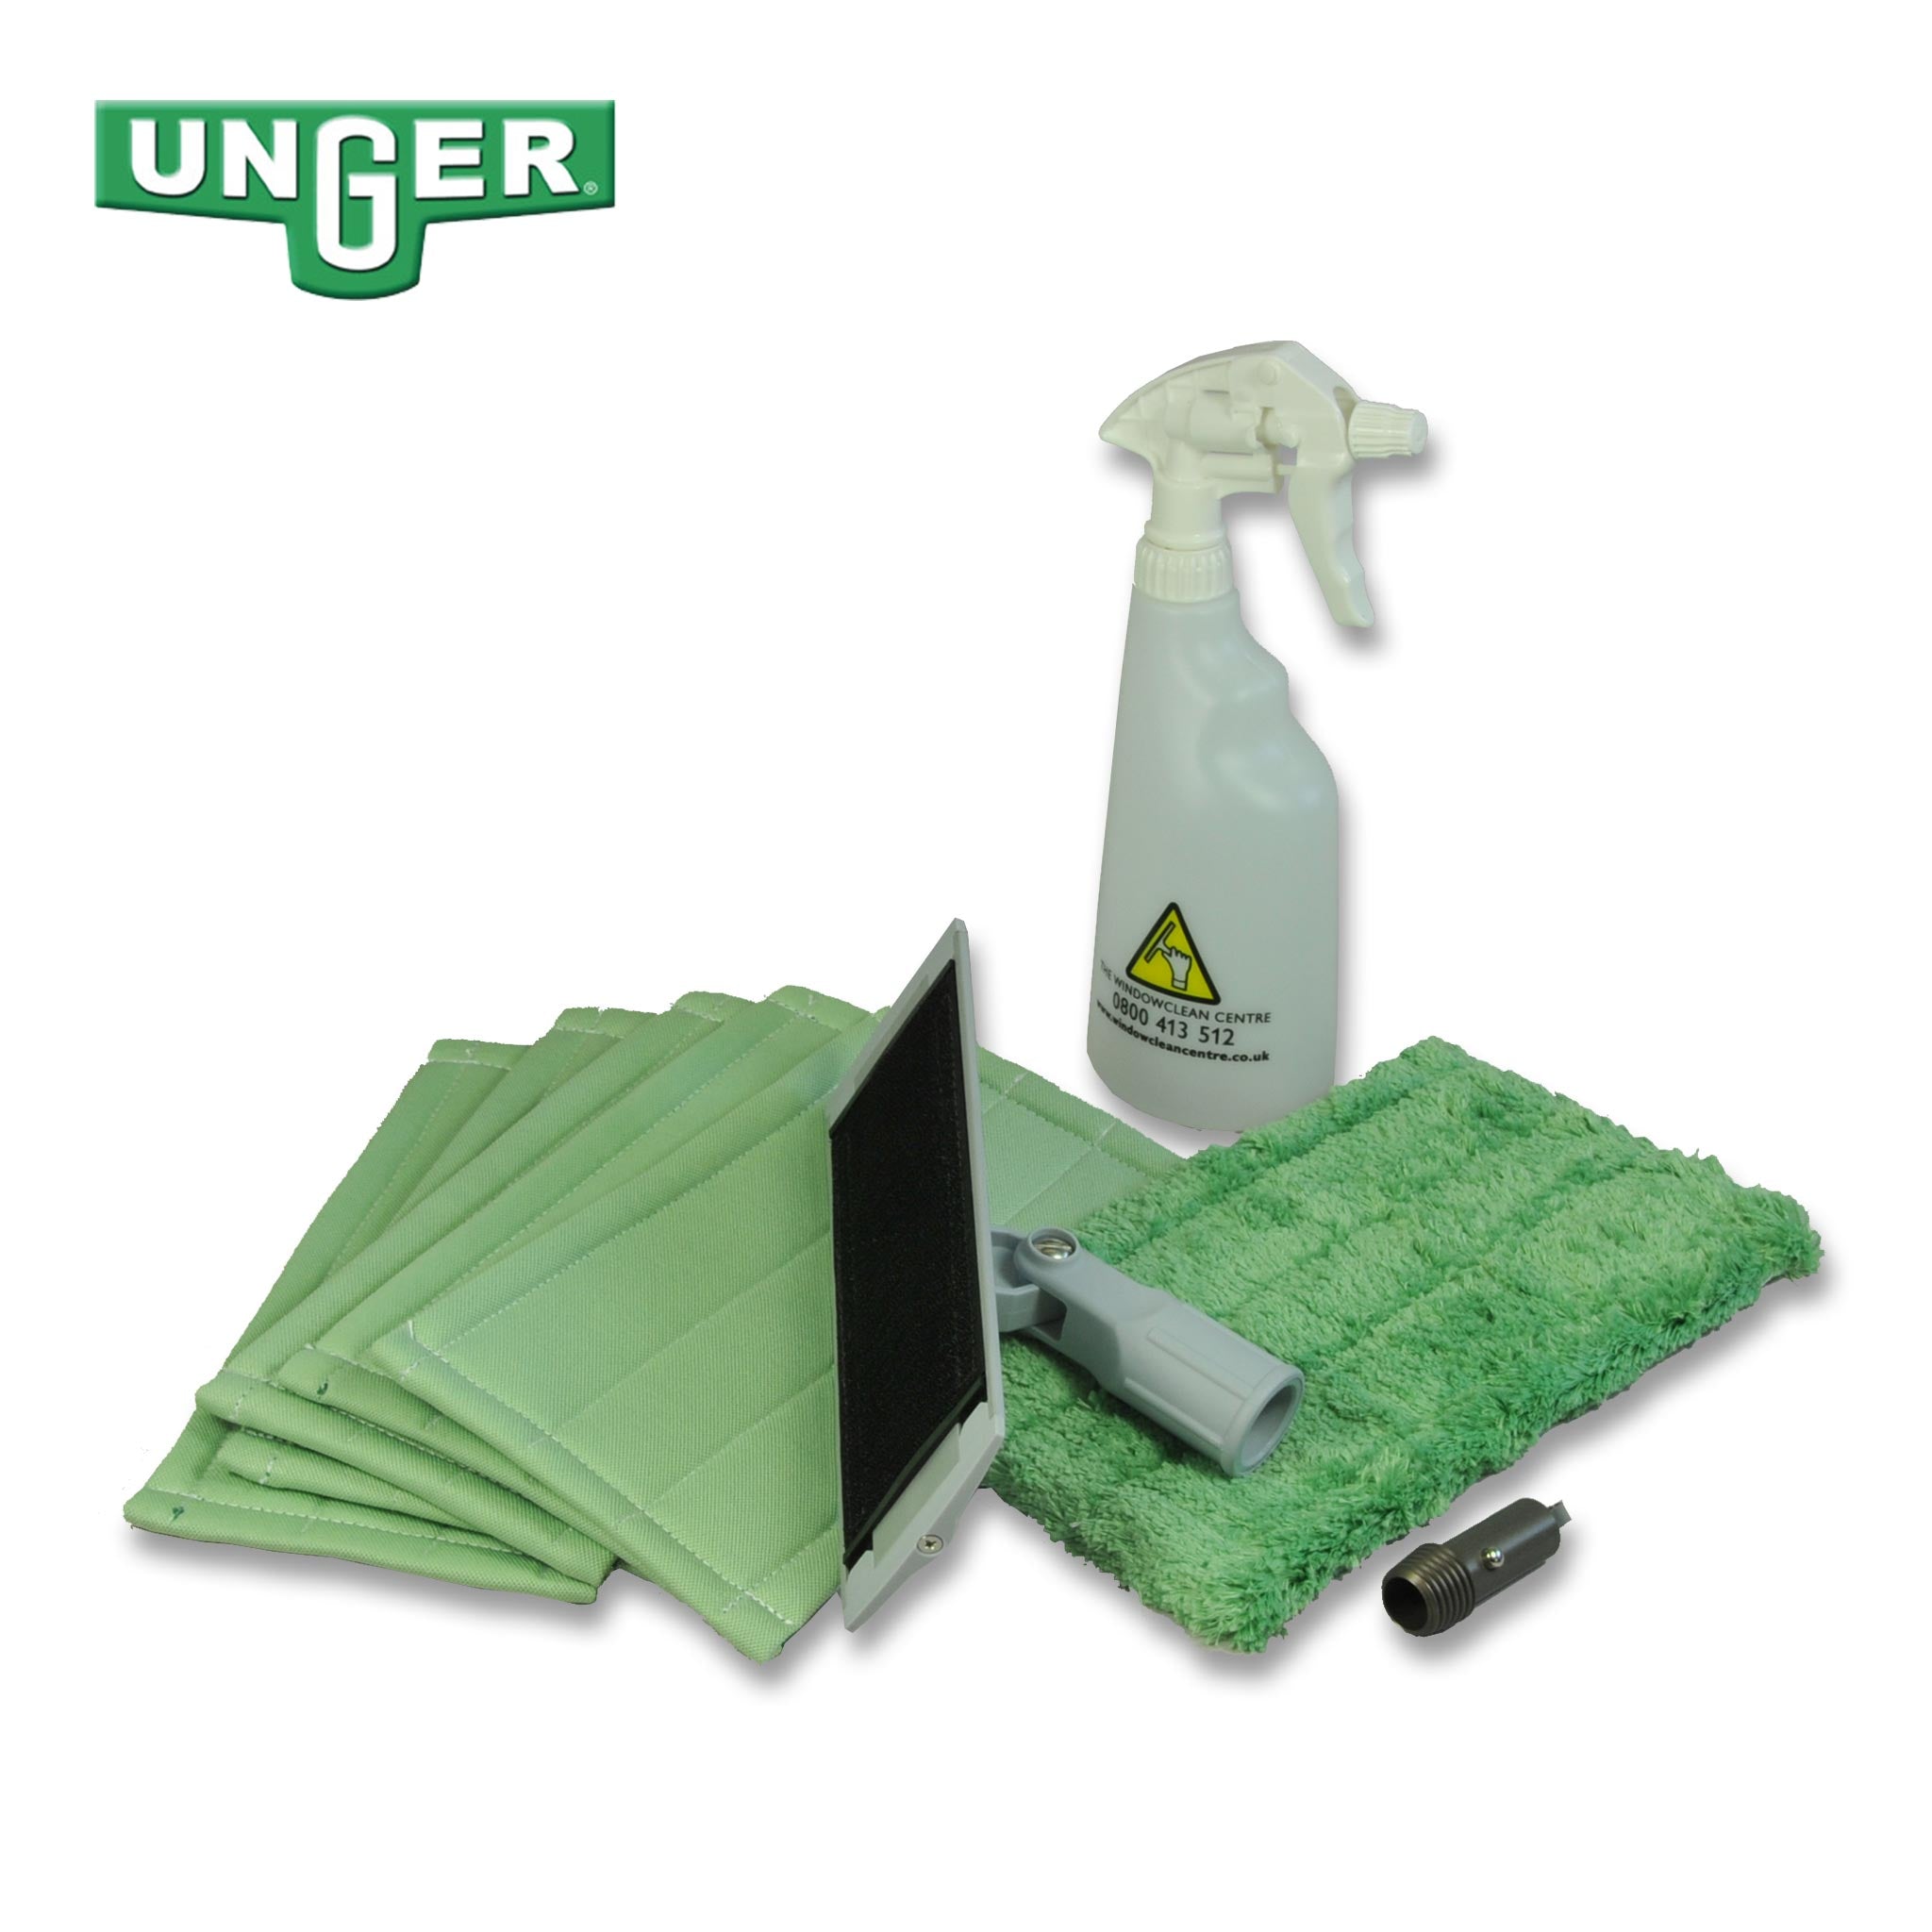 Unger Internal Glass Cleaning Kit